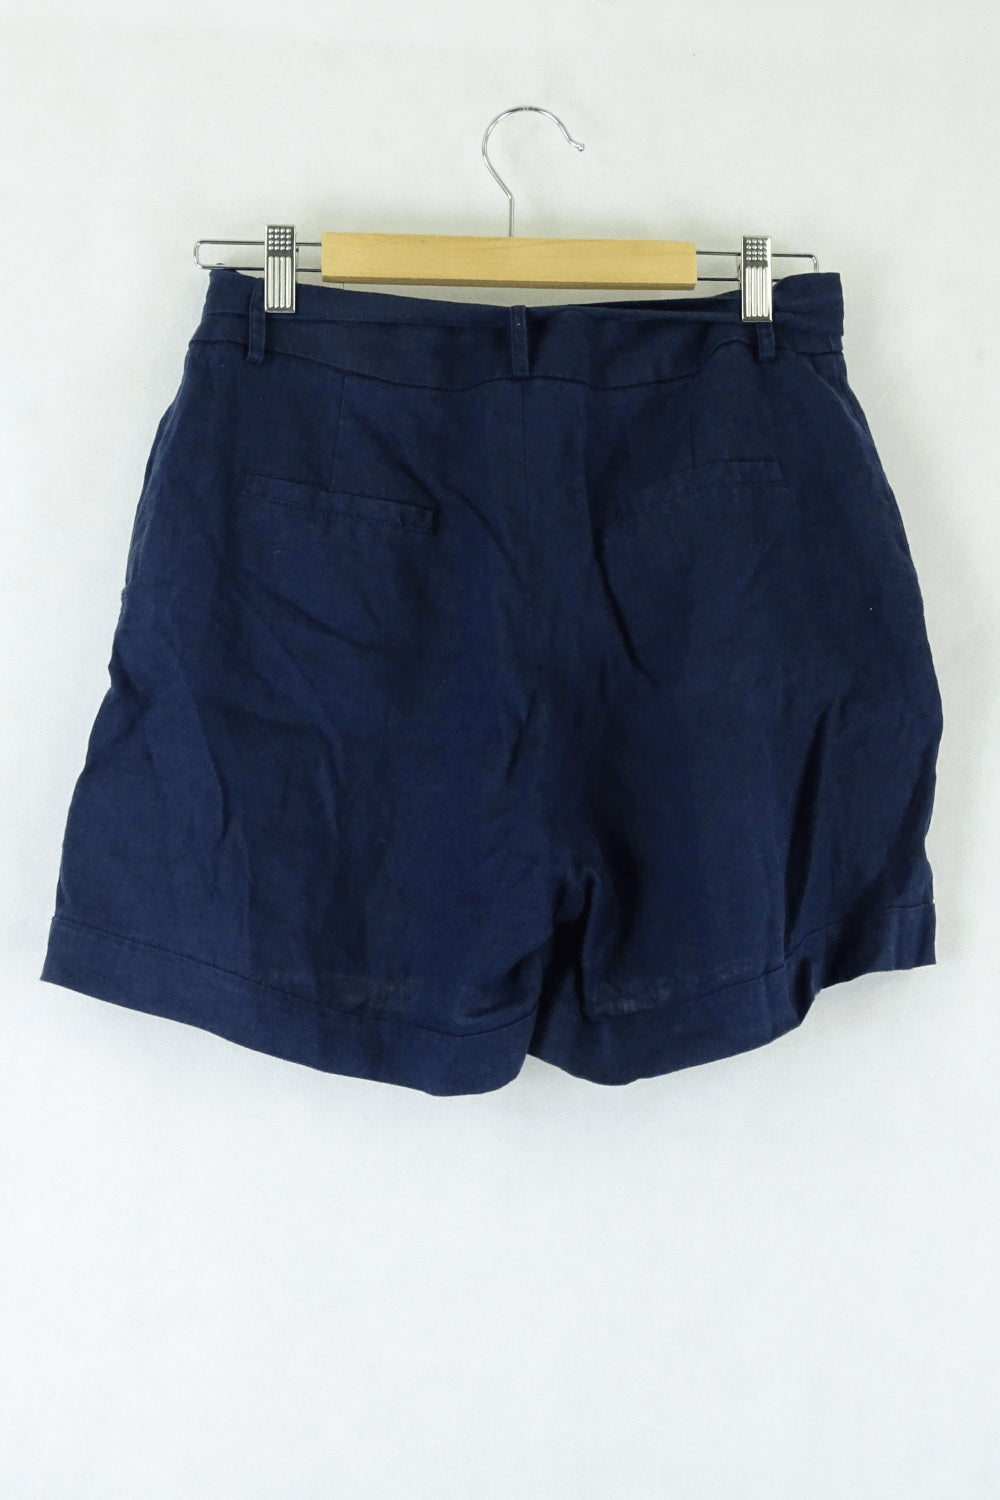 French Connection Navy Shorts 10